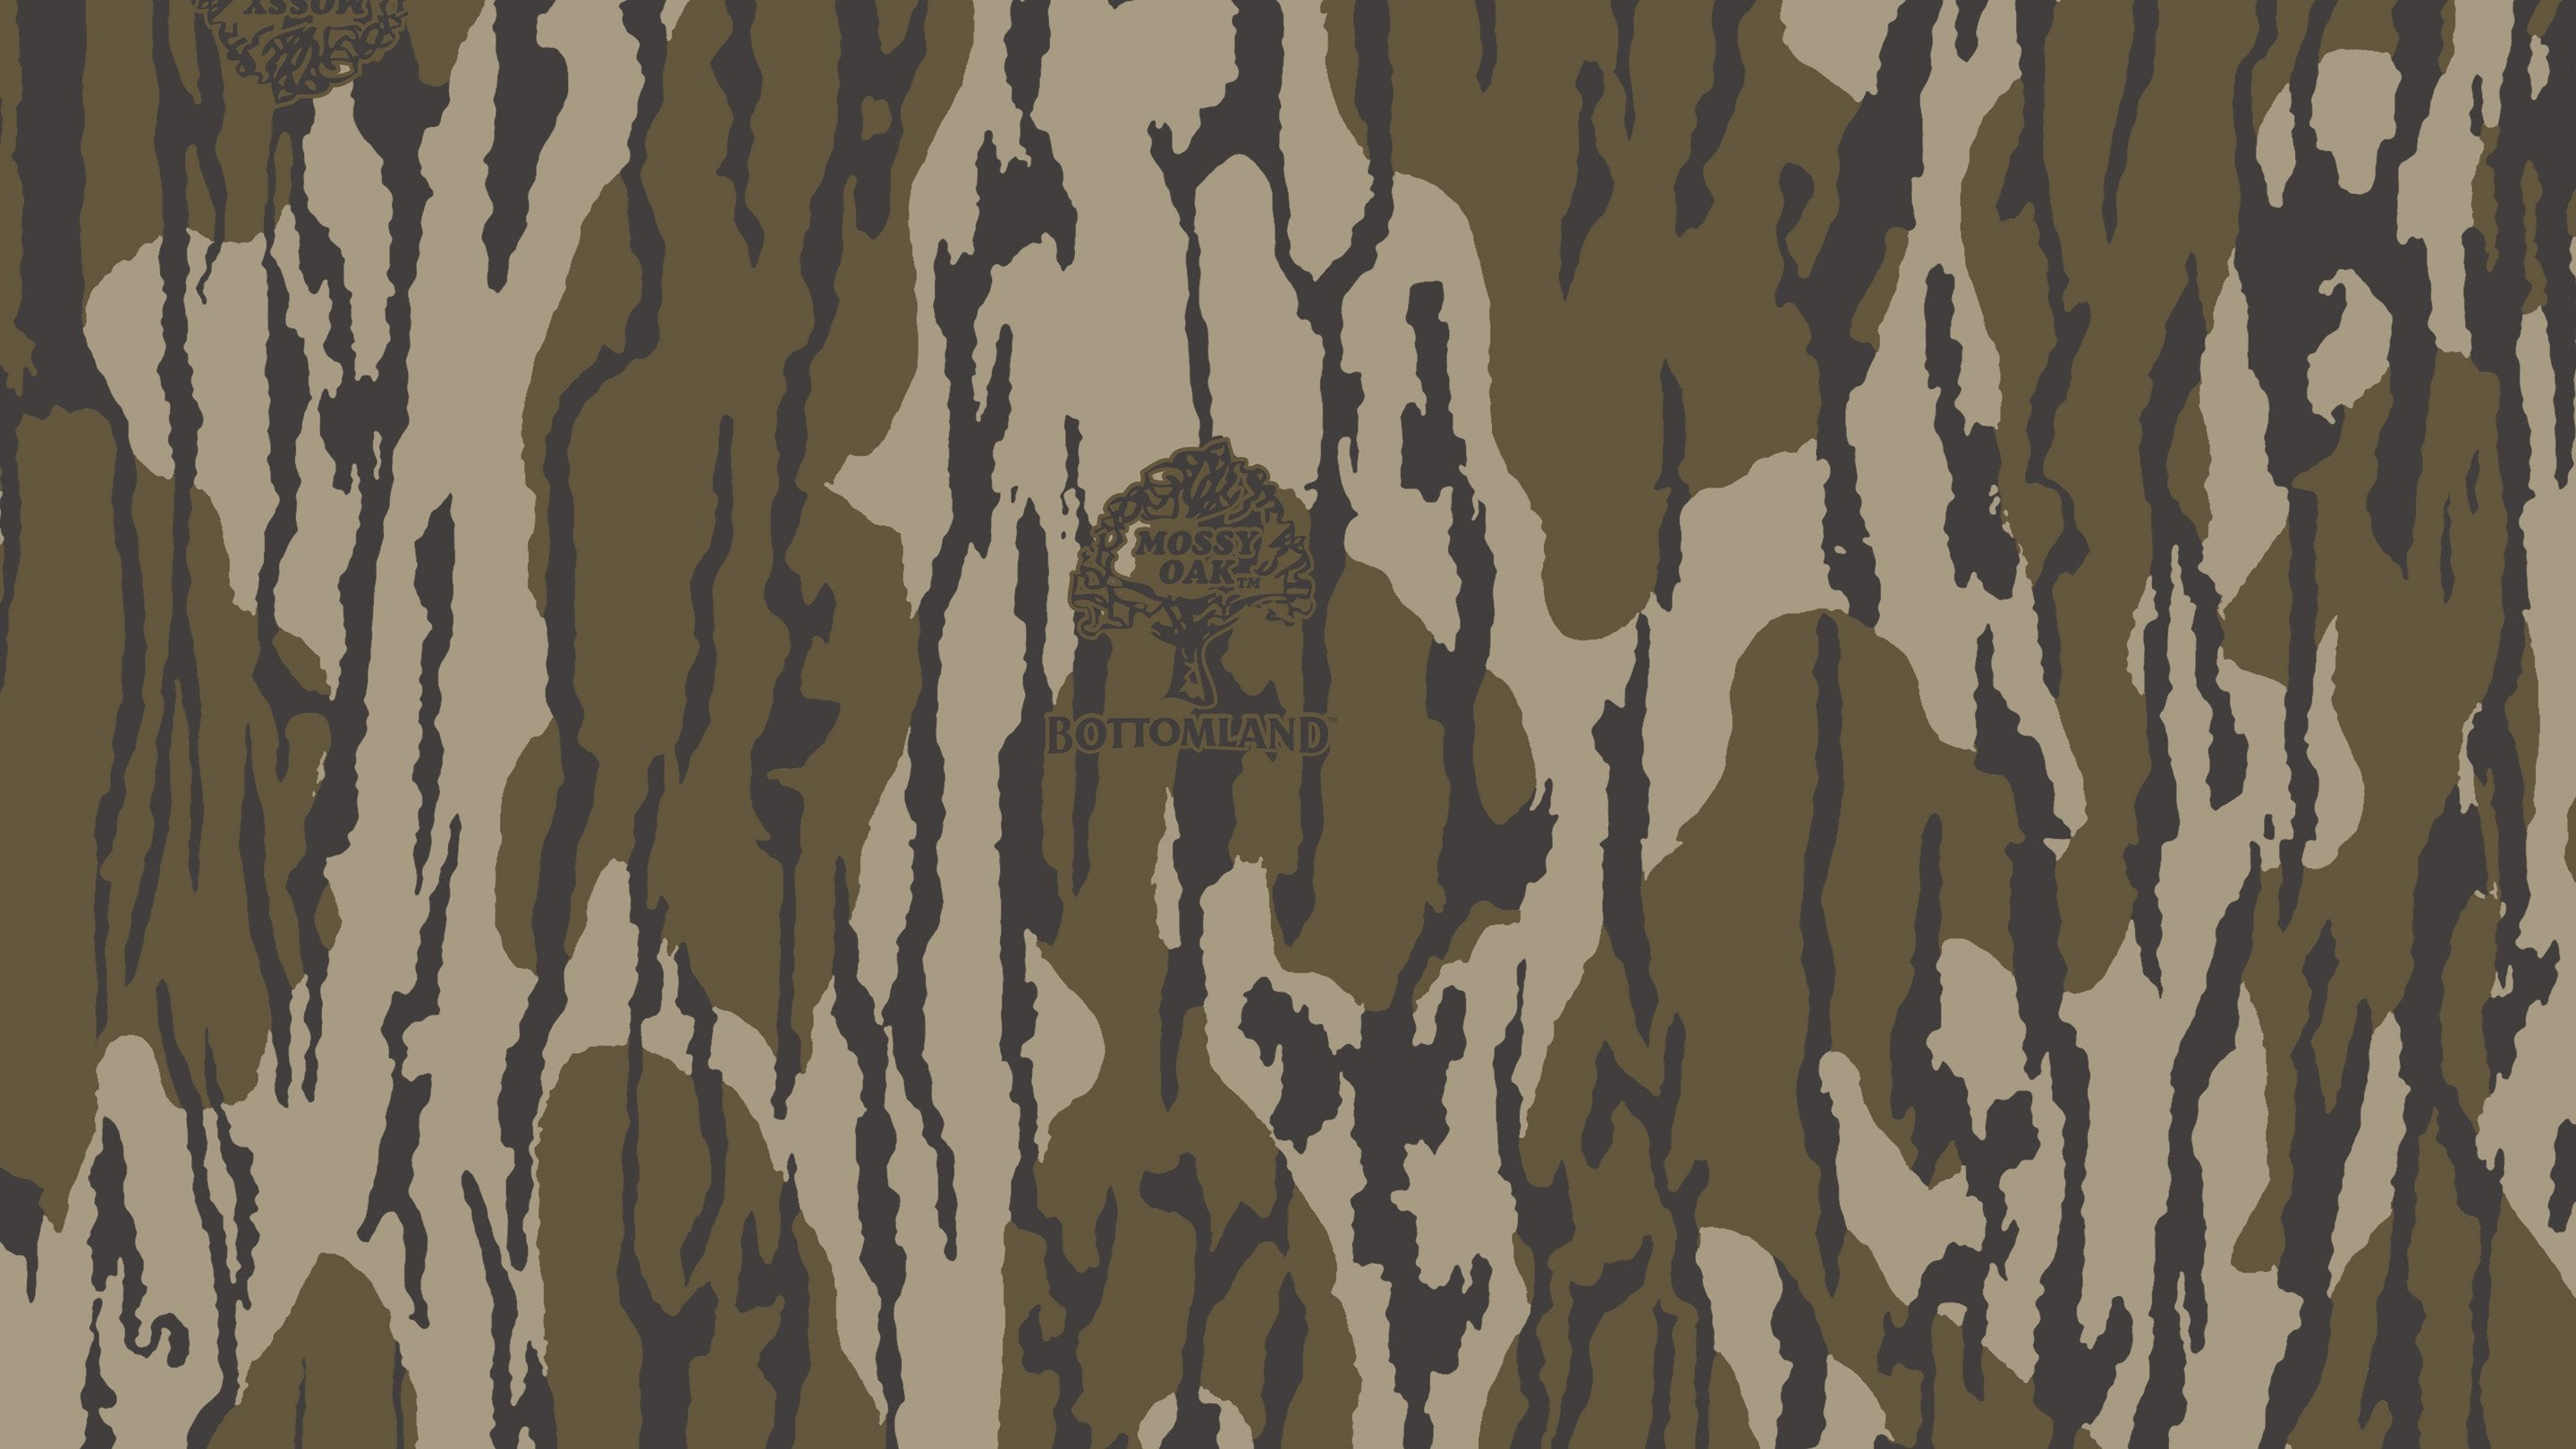 Mossy Oak Original Bottomland-THE classic camo pattern for THE